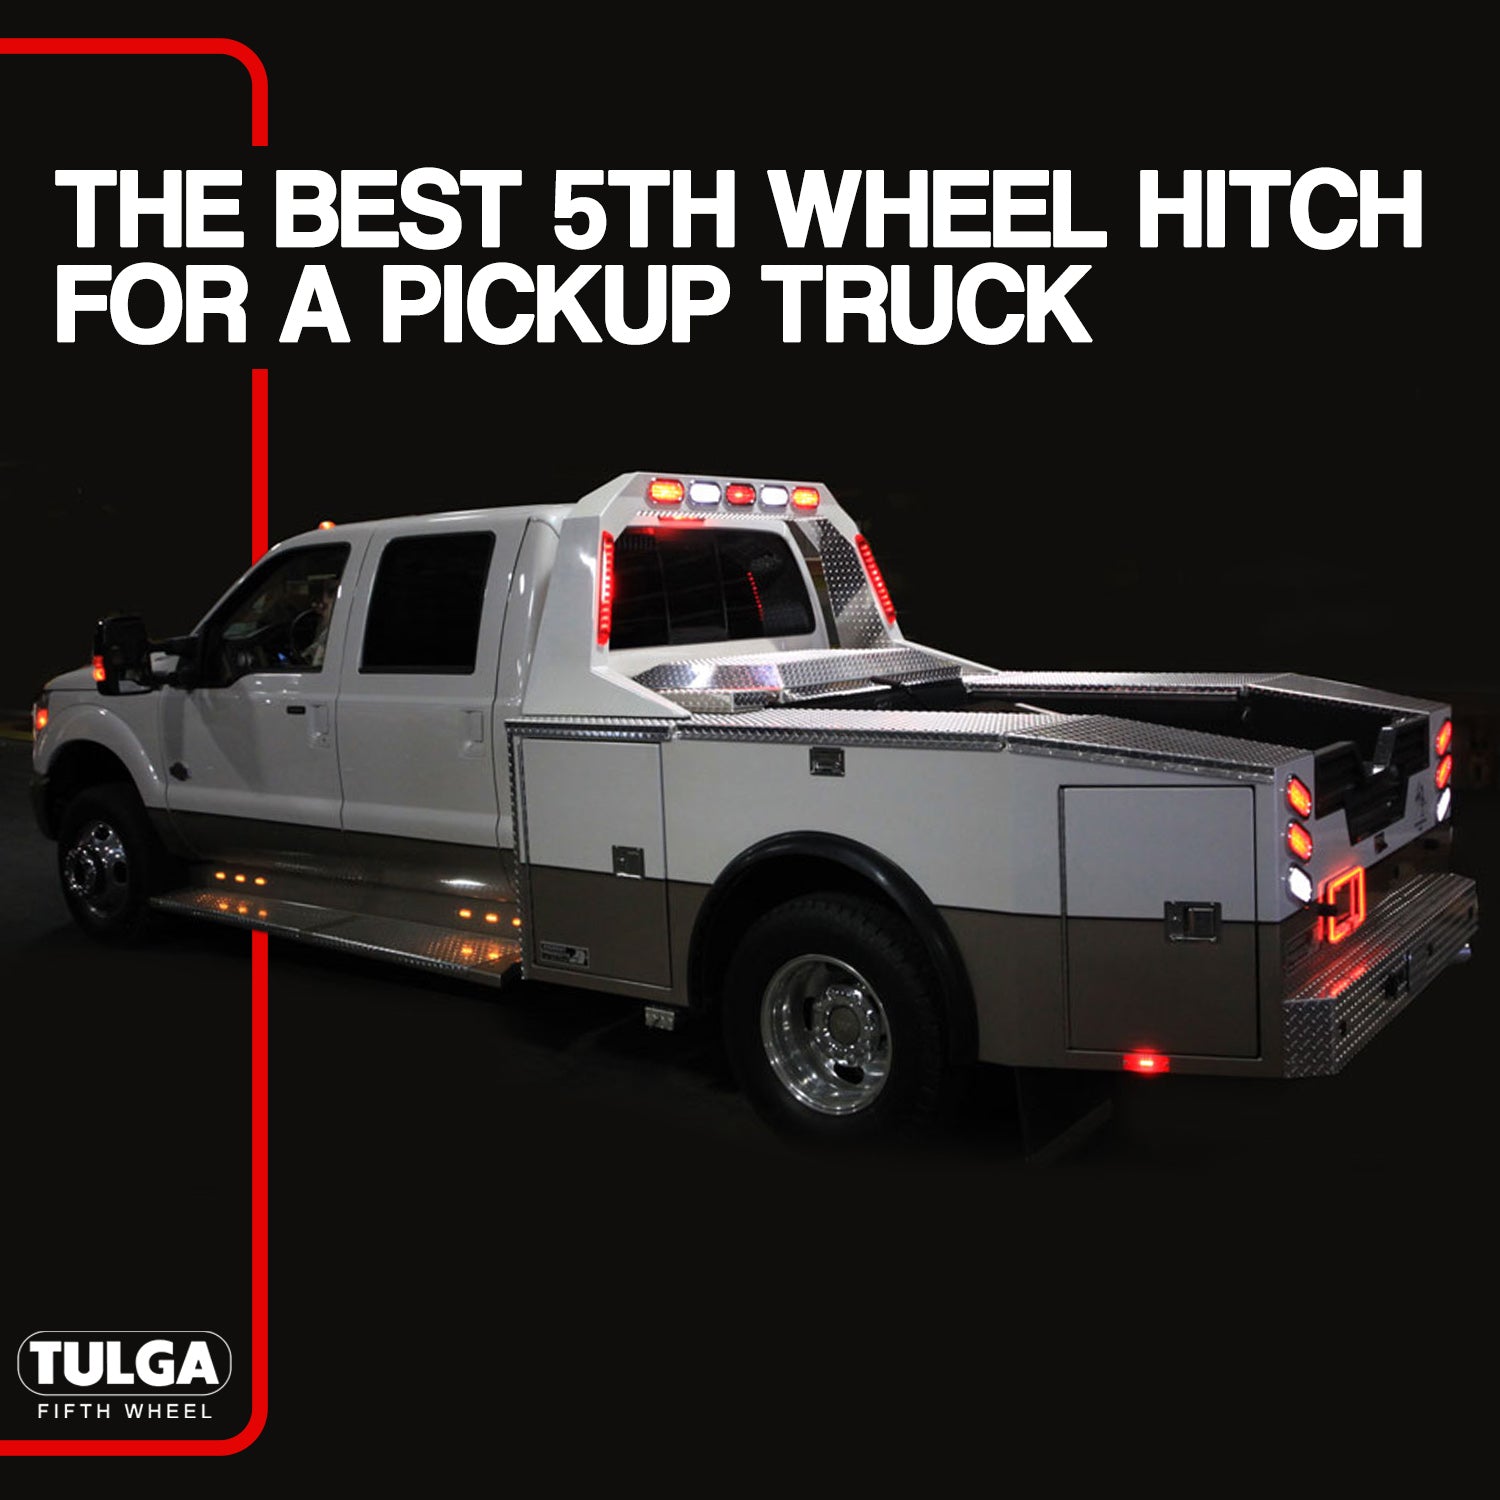 The Best 5th Wheel Hitch For A Pickup Truck